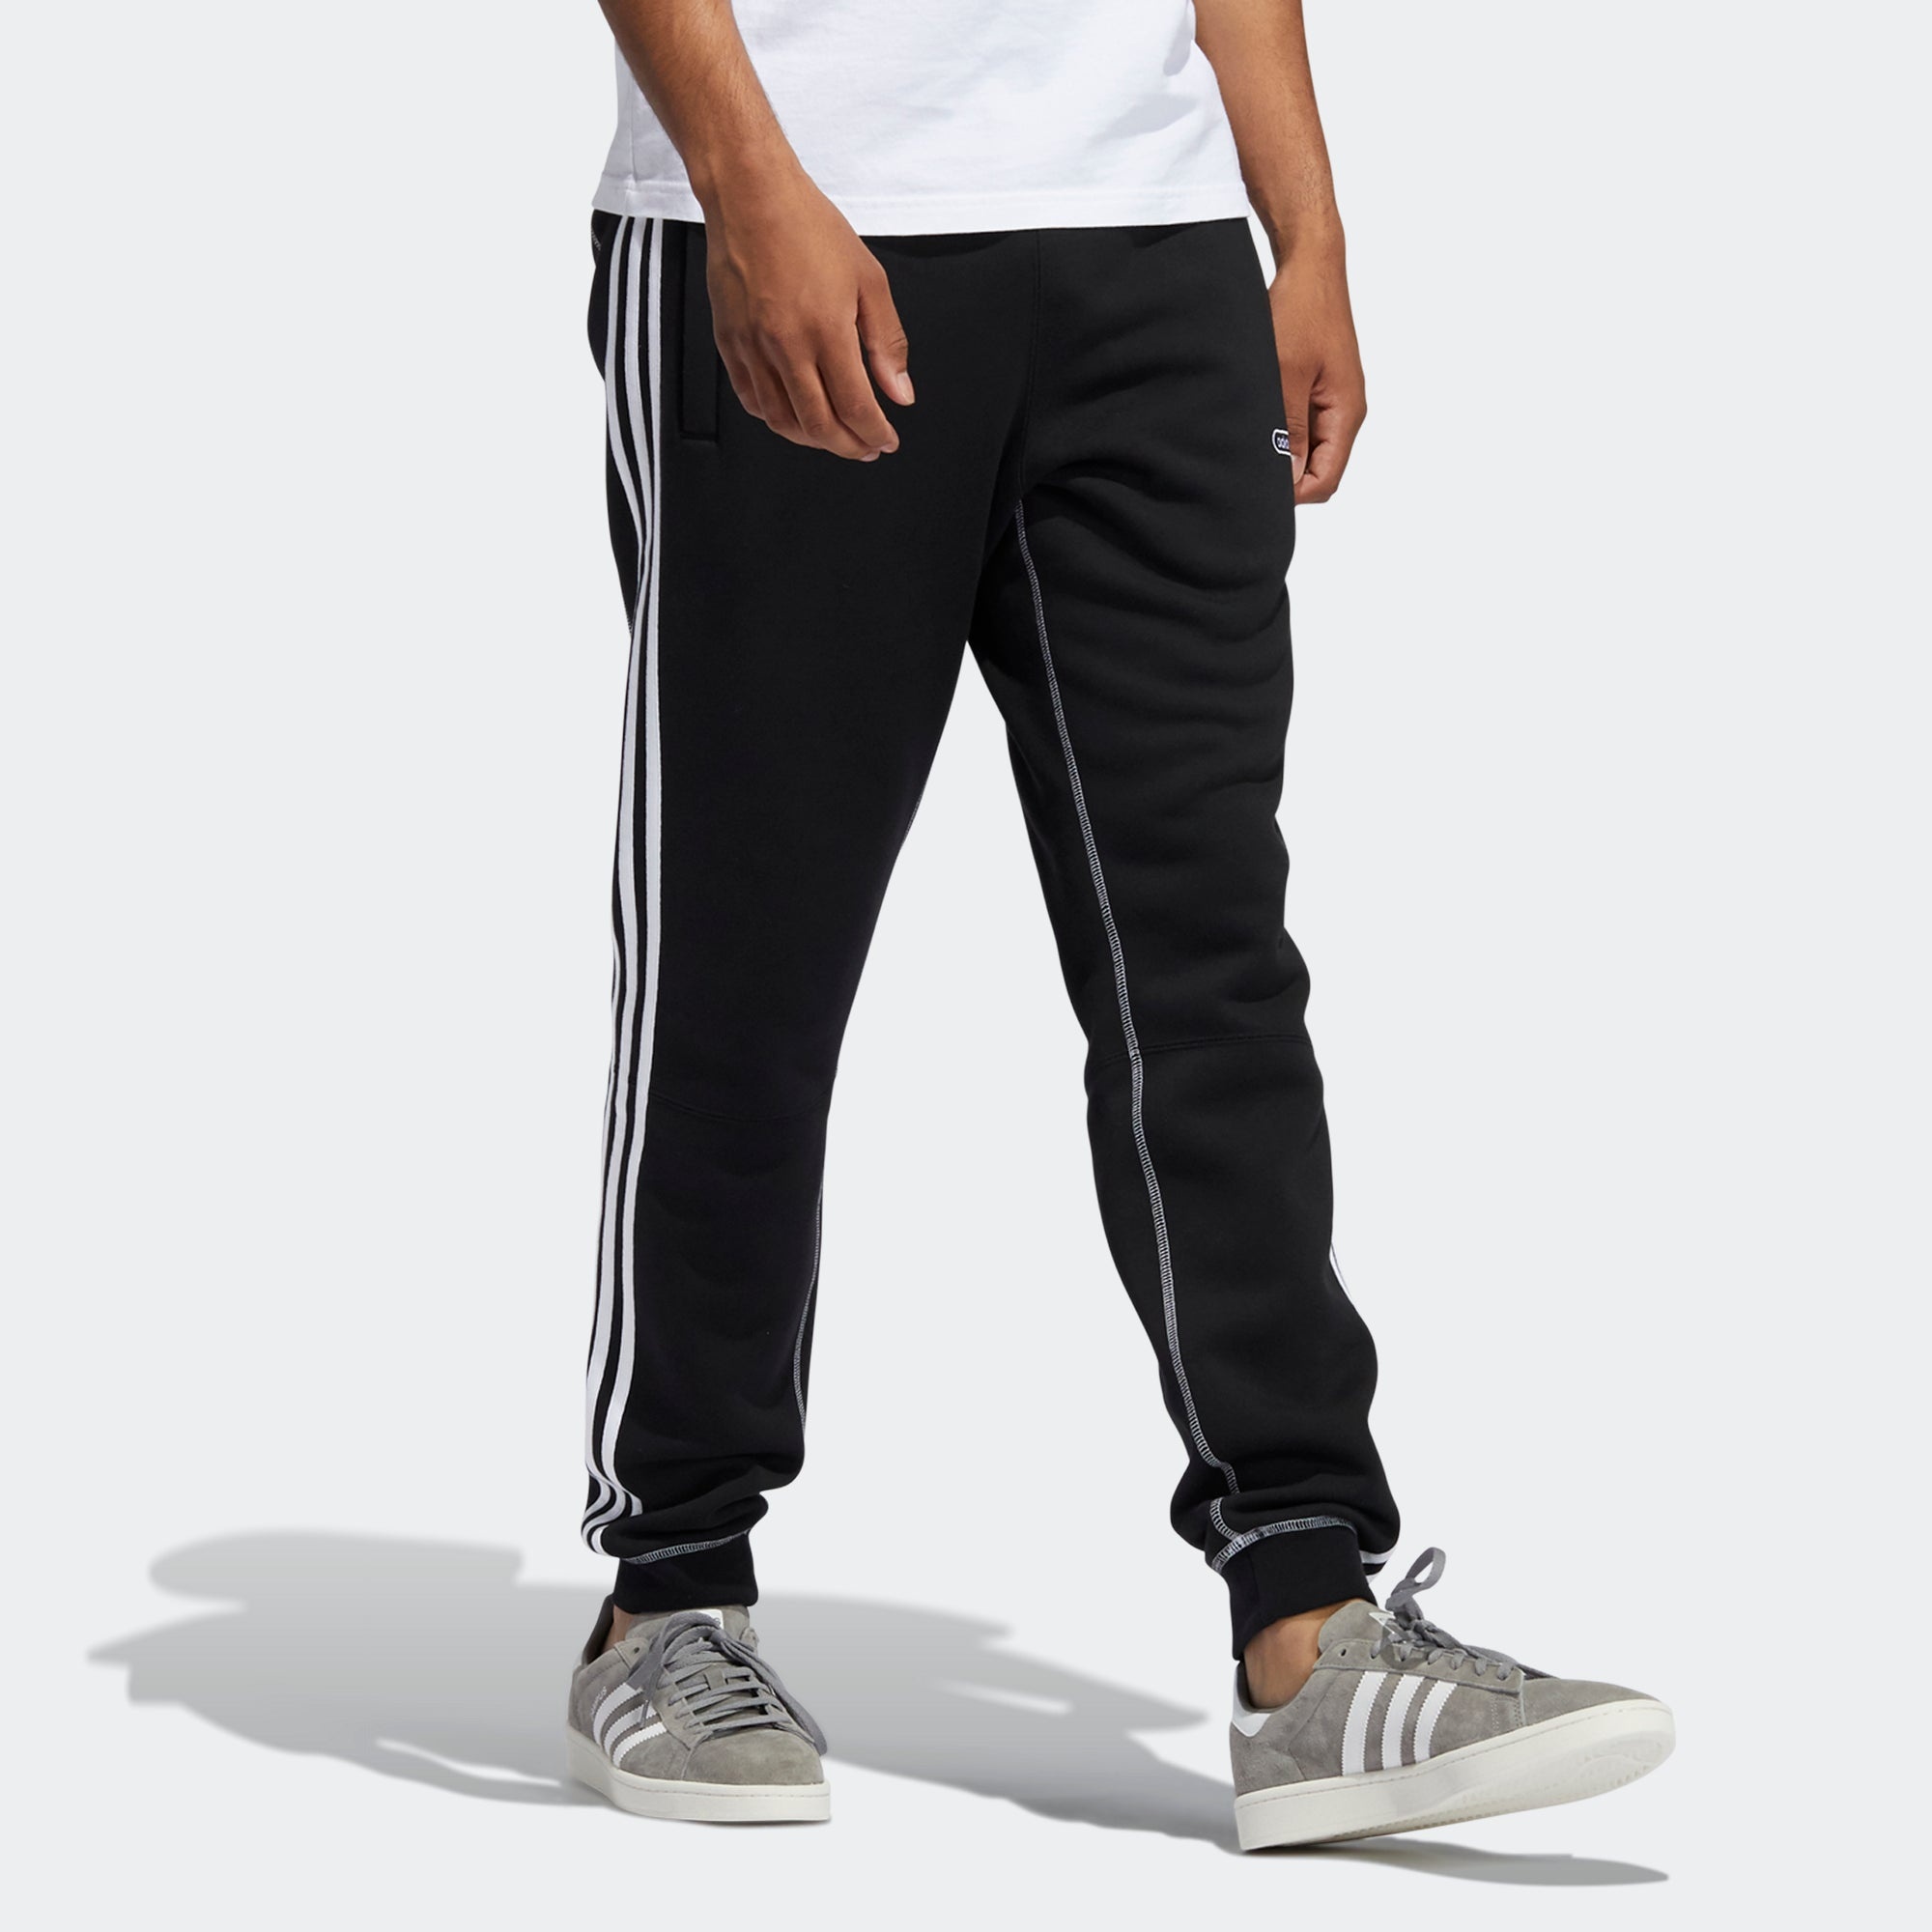 adidas originals Cntrst Stitch S Contrasting Colors Fleece Lined Stay Warm Bundle Feet Sports Pants  - 5